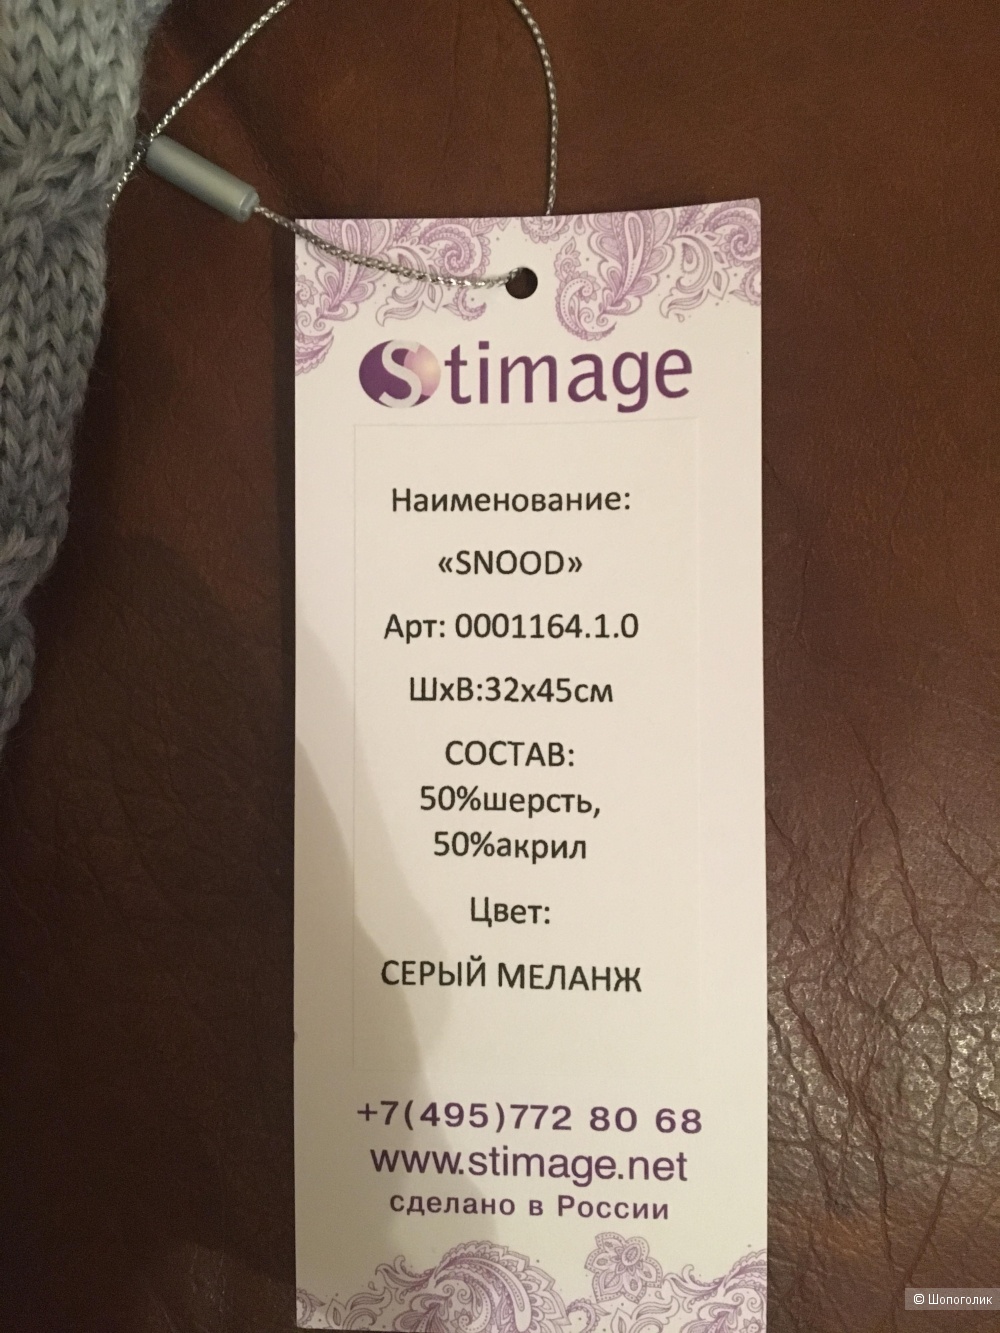 Снуд Stimage,one size